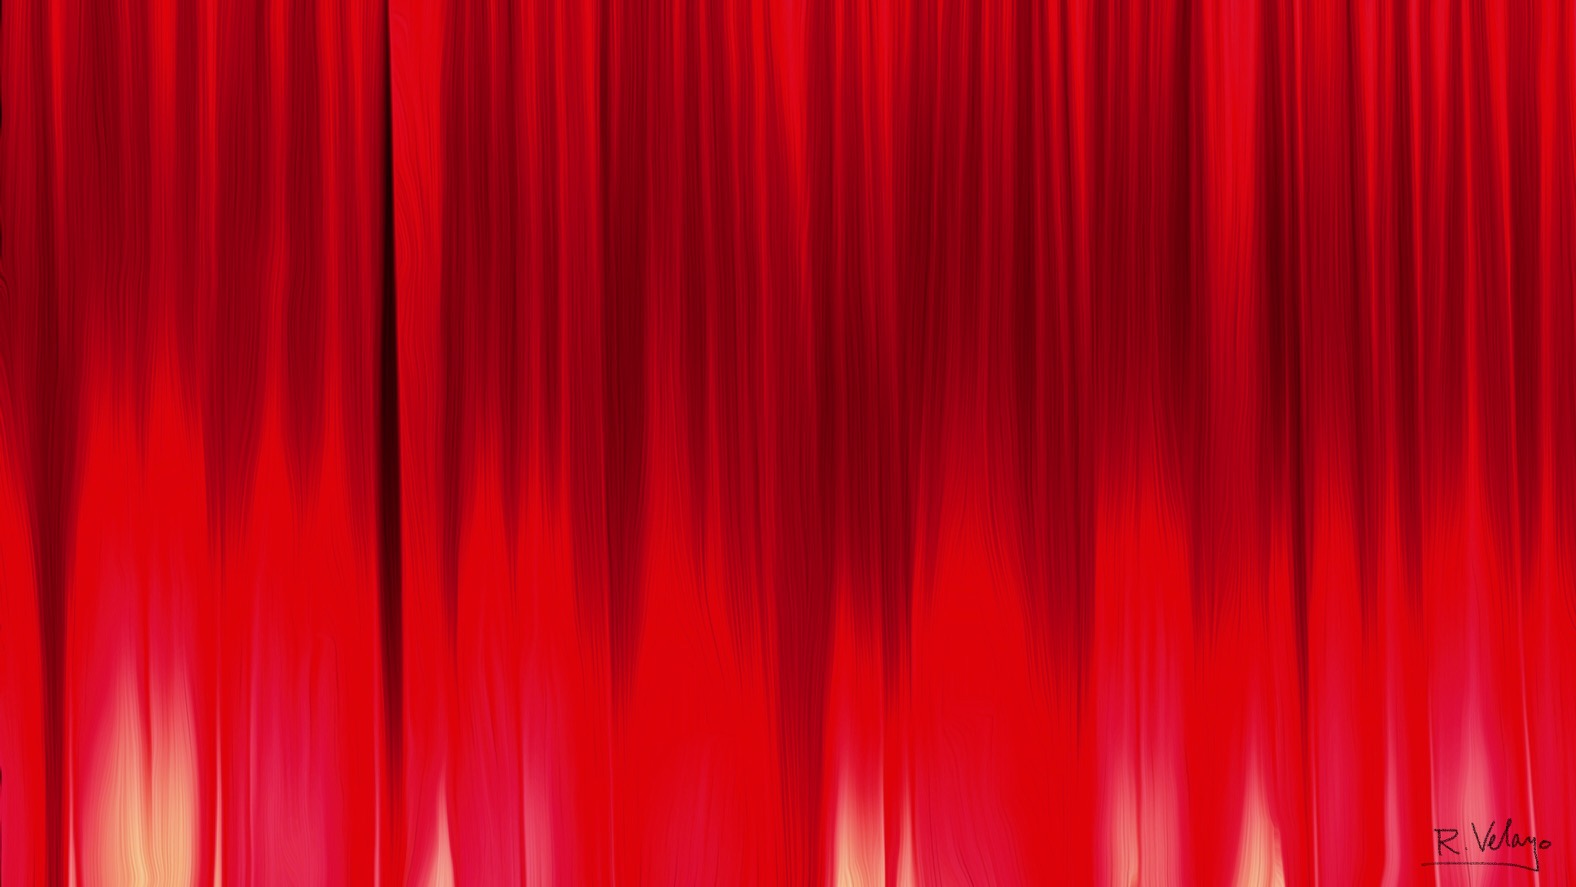 "RED VELVET STAGE CURTAIN" [Created: 11/03/2021]